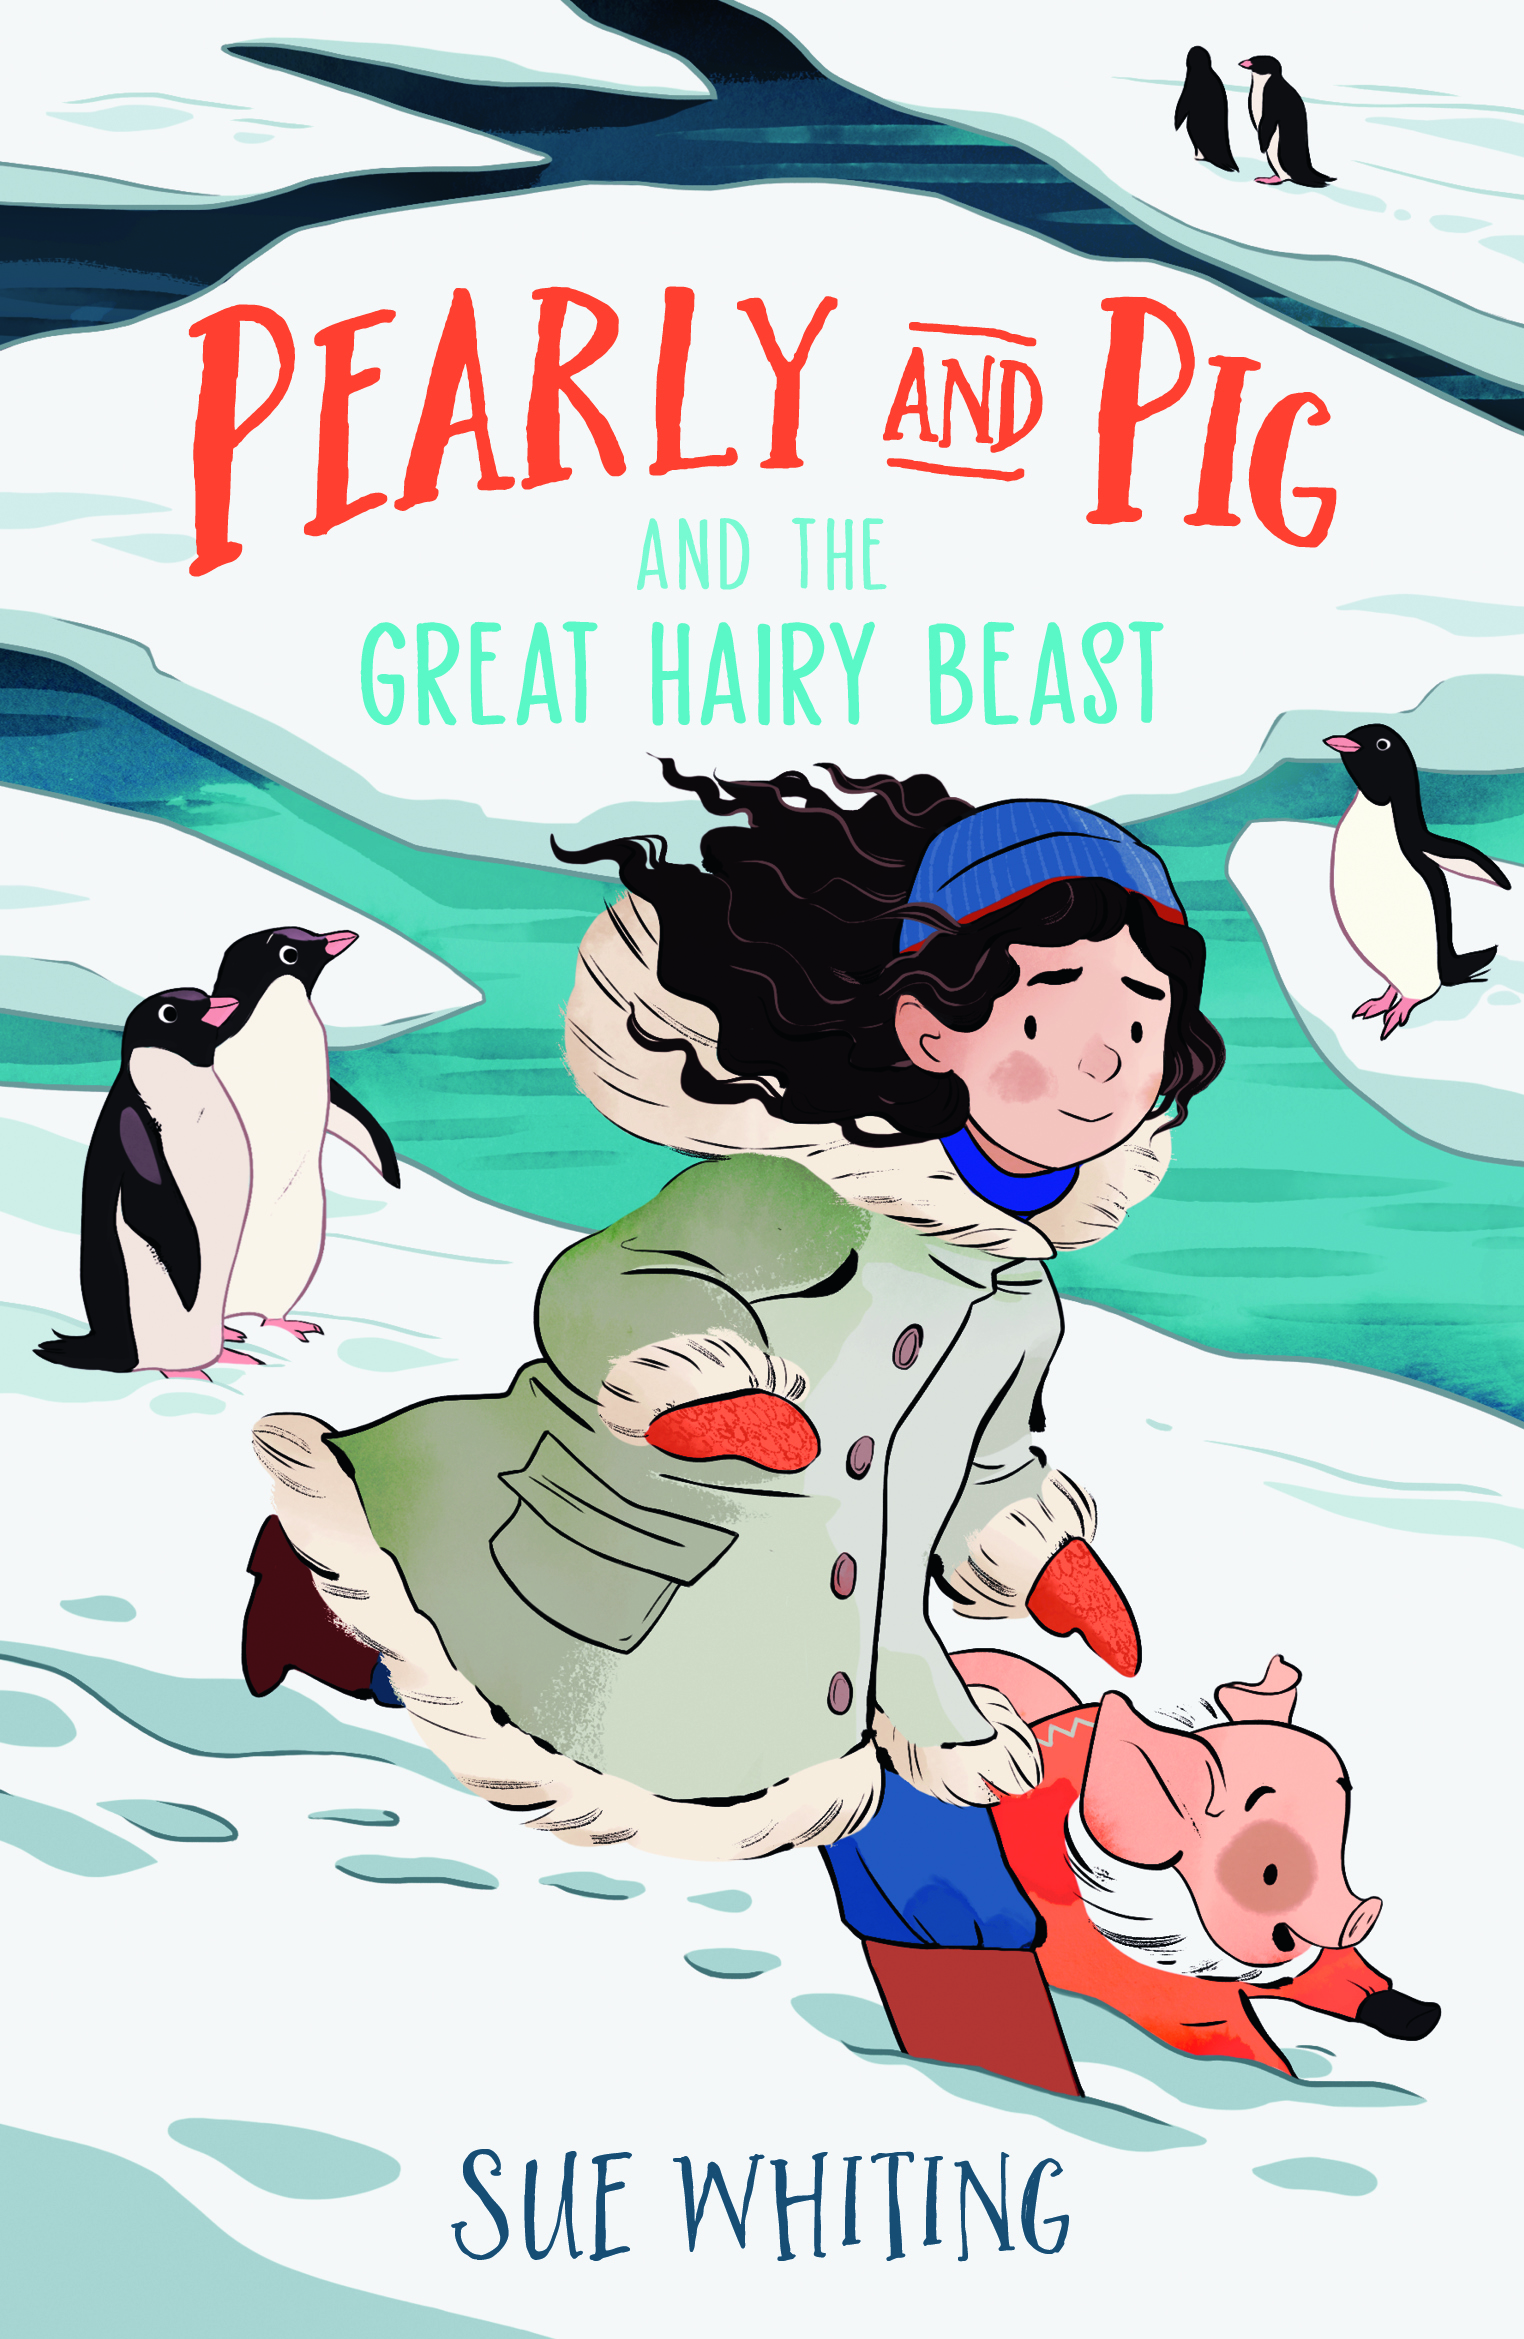 Pearly-and-Pig-and-the-Great-Hairy-Beast